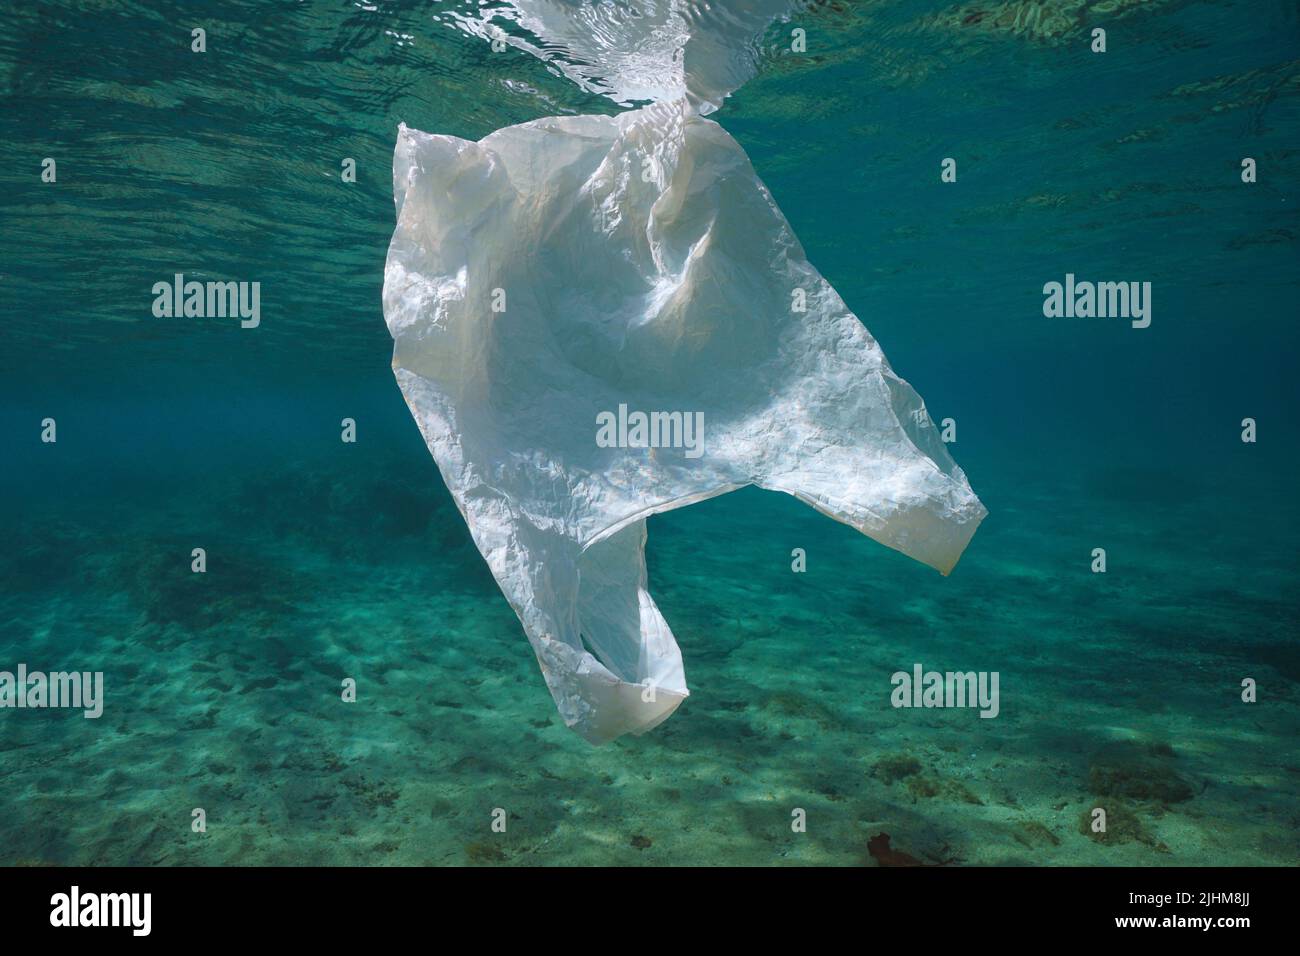 A white plastic bag underwater, plastic waste pollution in the oceans Stock Photo